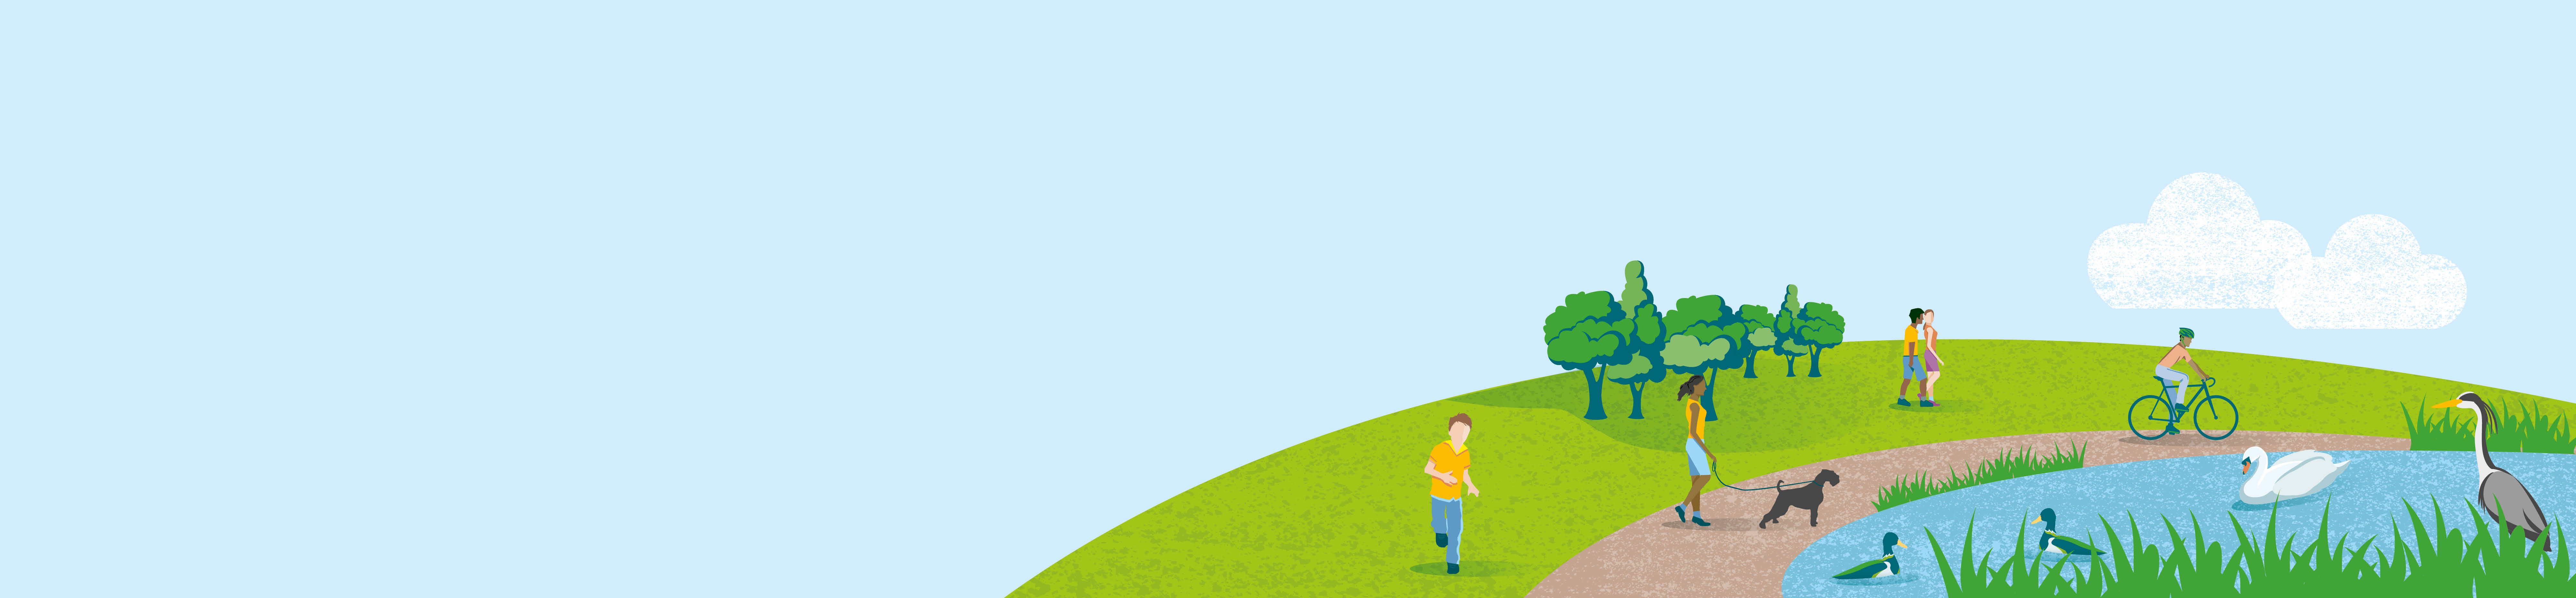 Illustration of a hillside with people walking and cycling beside a pond